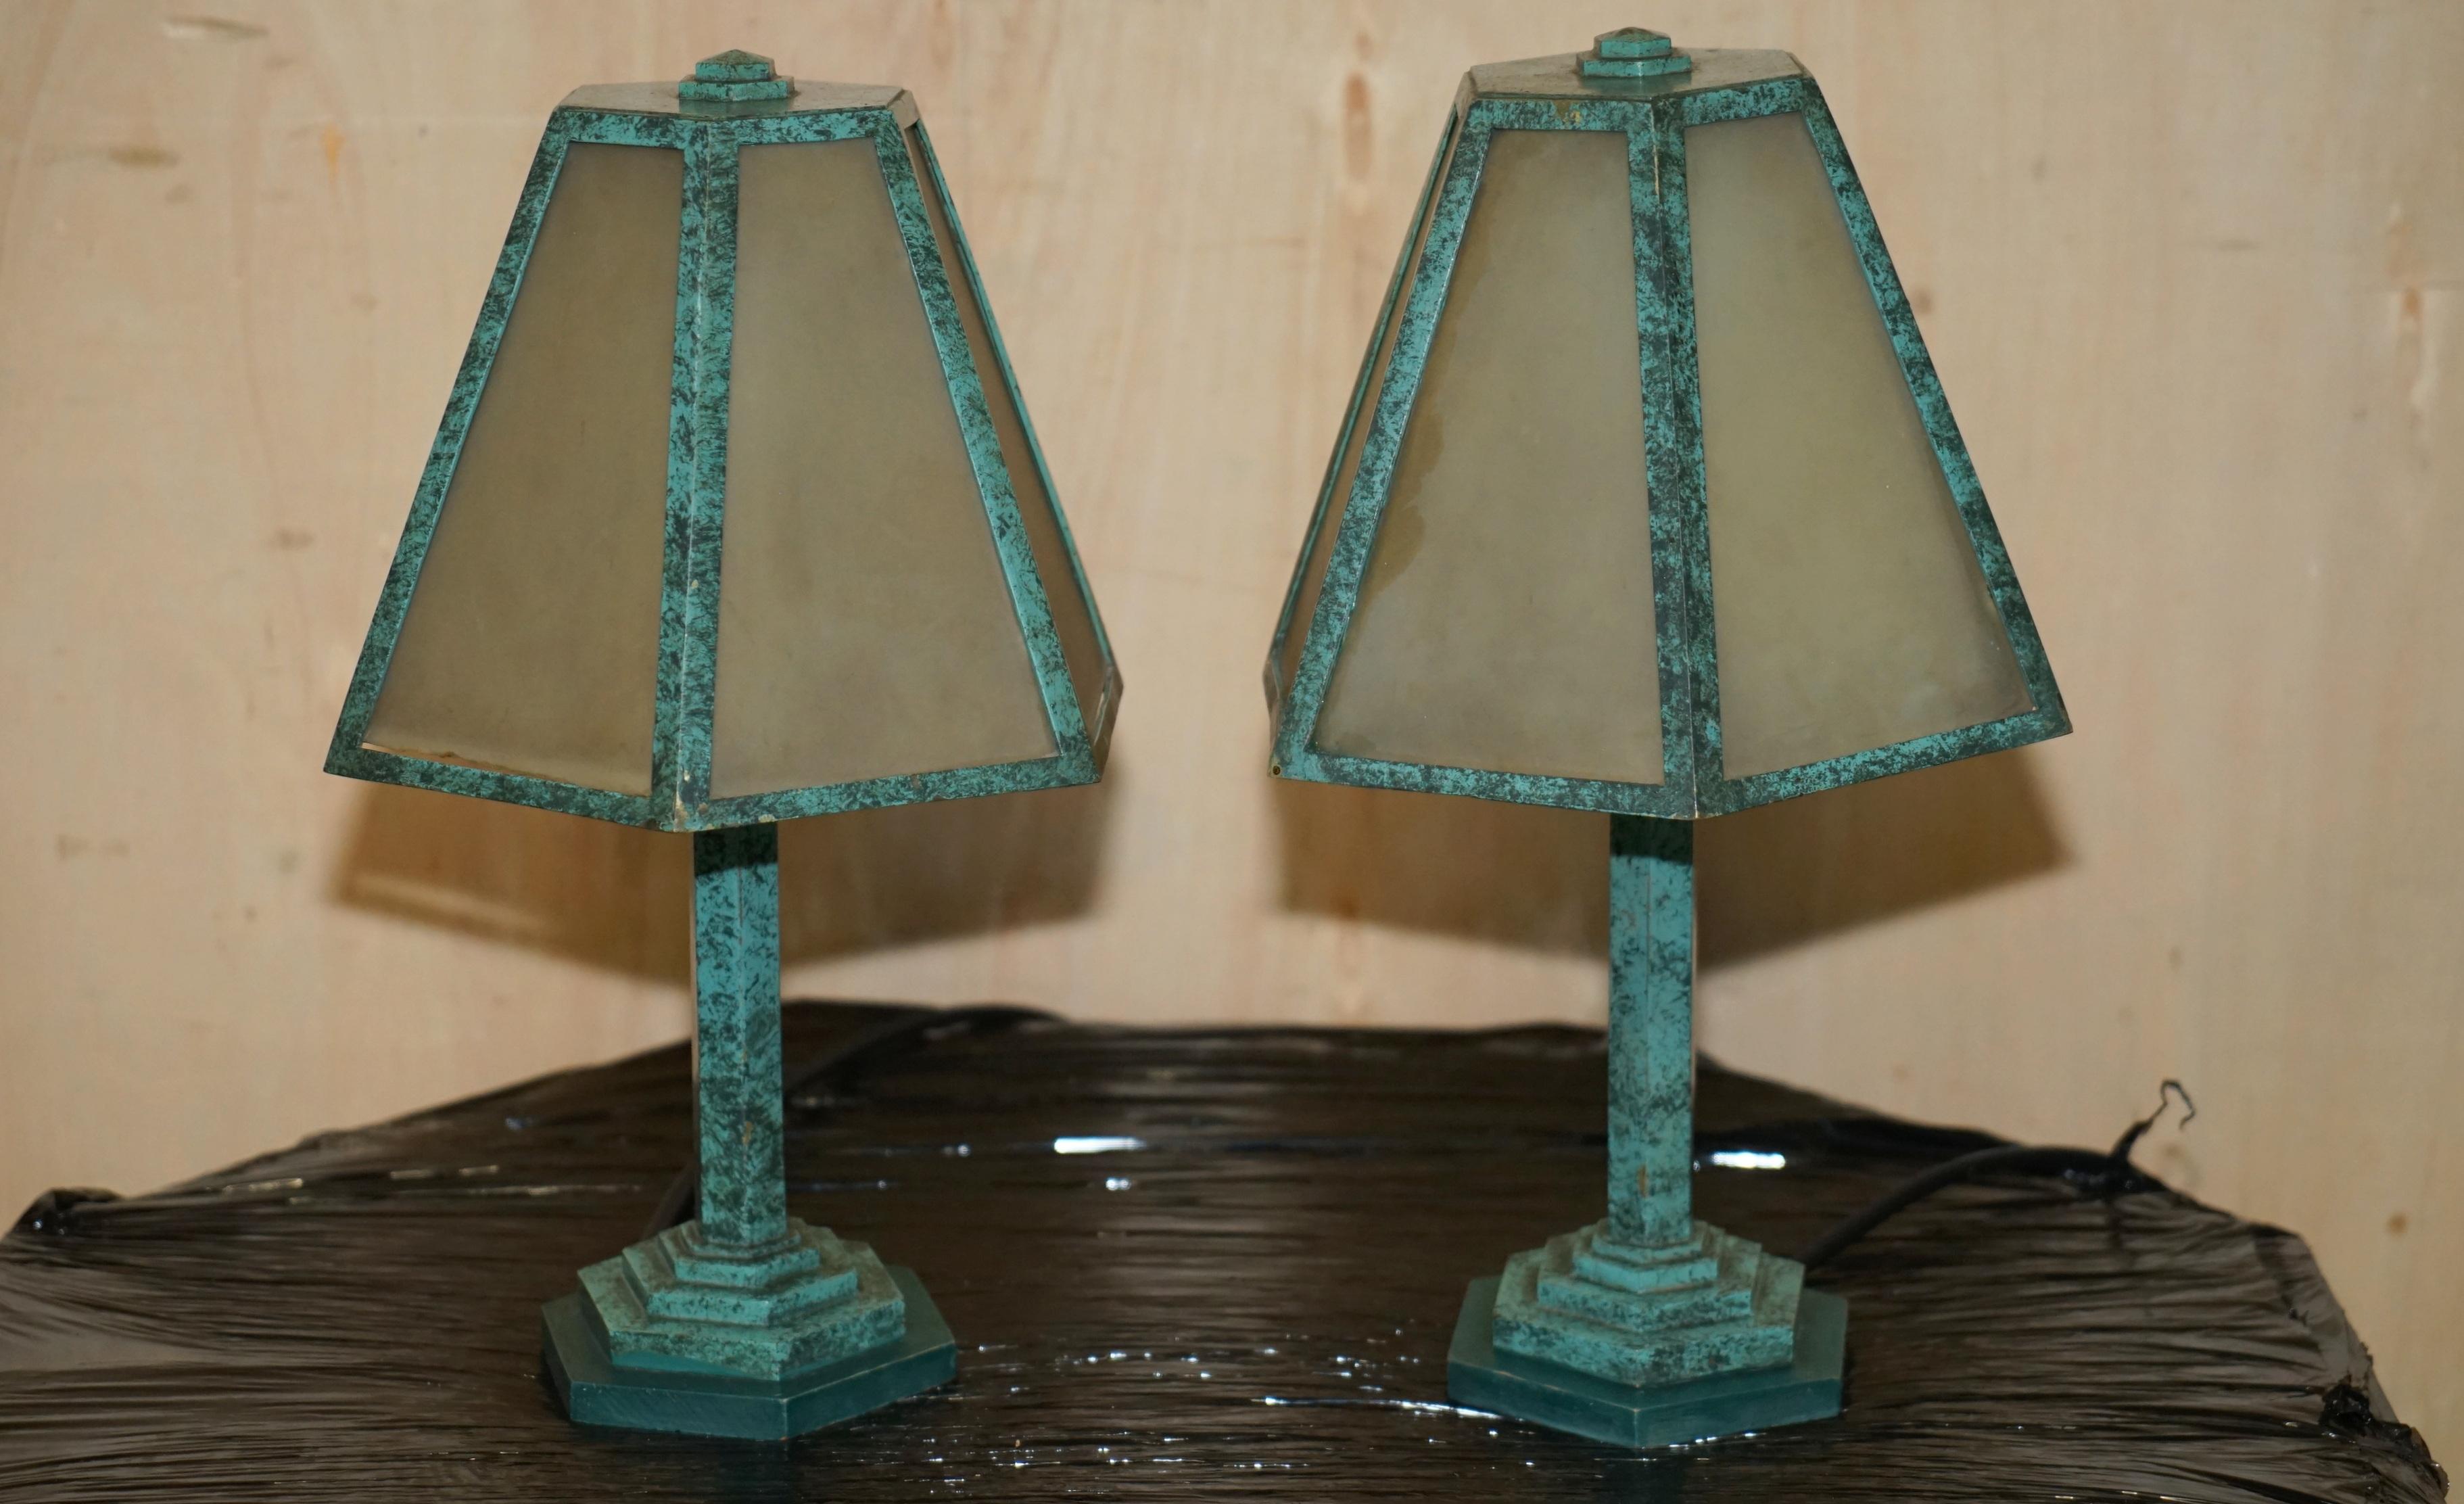 We are delighted to offer for sale this stunning pair of circa 1960's Art Deco Verdigris green table lamps

A very good looking well made and decorative pair of mid century modern Italian table lamps


The lamps have been fully restored to include